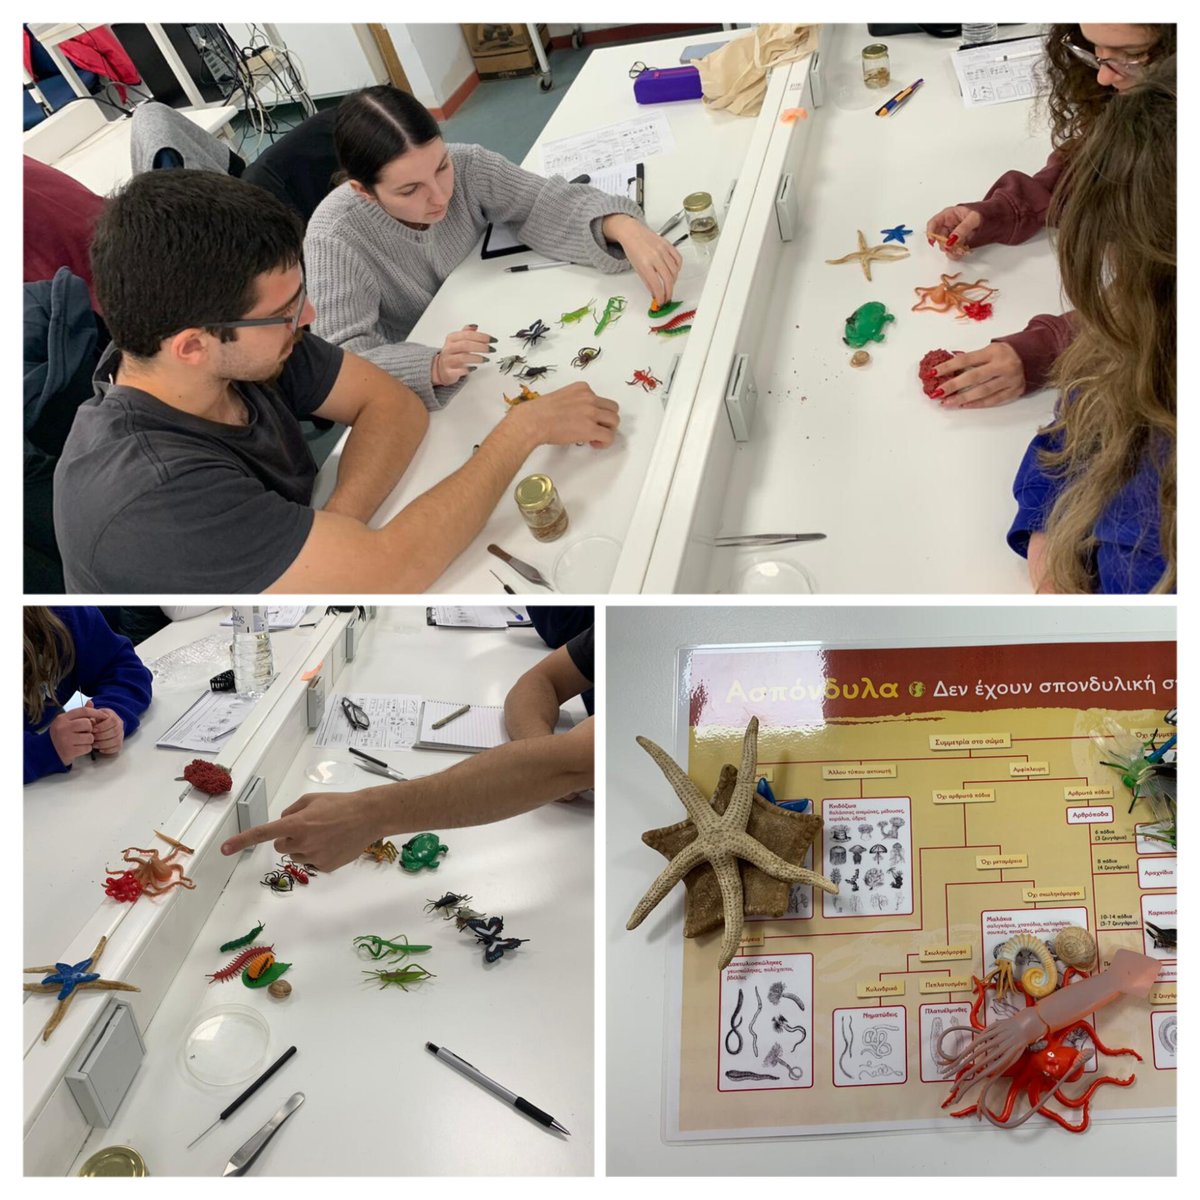 Yesterday WP4 lead, Iasmi Stathi of @nhmcrete talked about #TETTRIsEU and the importance of #taxonomy to students. They grouped plastic animals according to their own criteria and then compared with taxonomic keys for invertebrates. #Teaching the #NextGeneration of #taxonomists